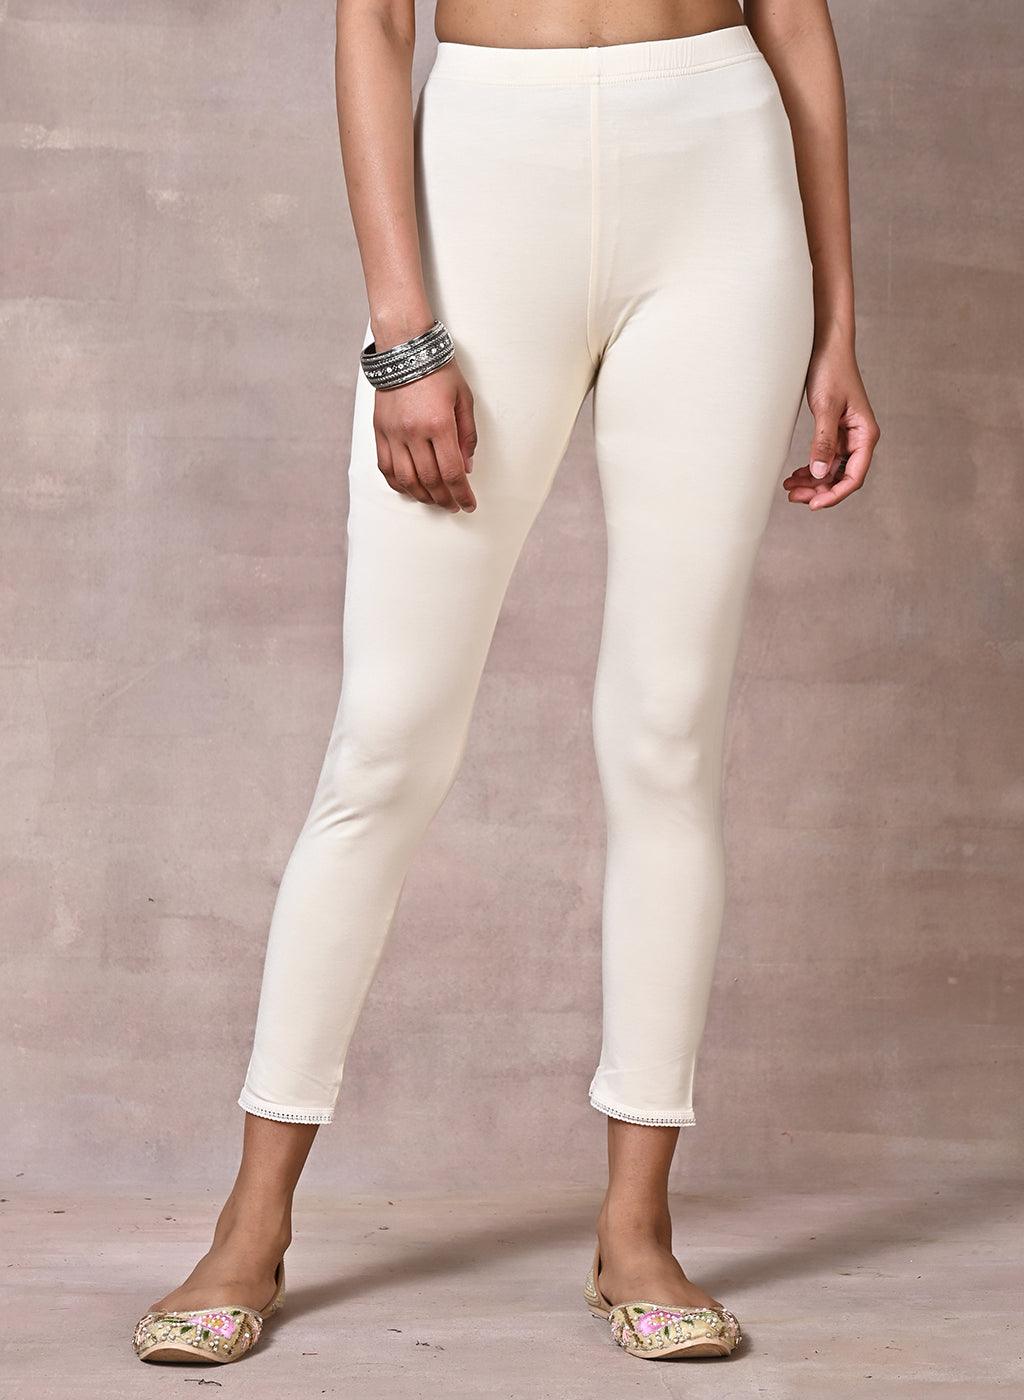 Off white Solid Ankle Length Plus Legging - VALLES365 by S.C. - 4145004